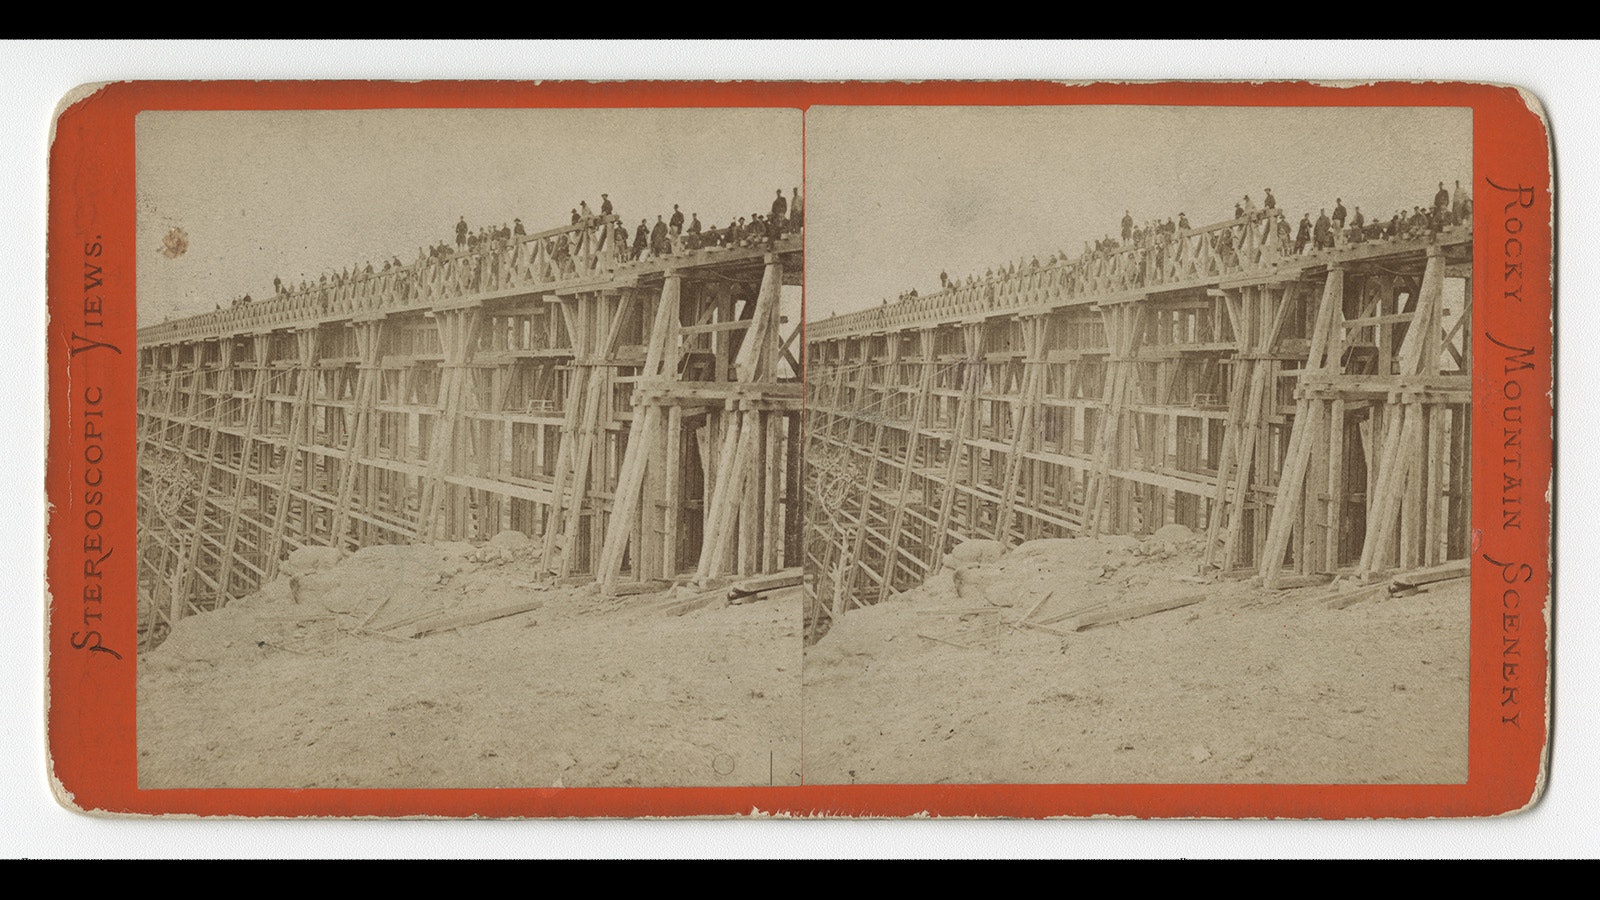 A.J. Russell's 19th Century photographic images, contained in stereo card format, showing the Dale Creek Bridge from Granite Bluffs in 1868.